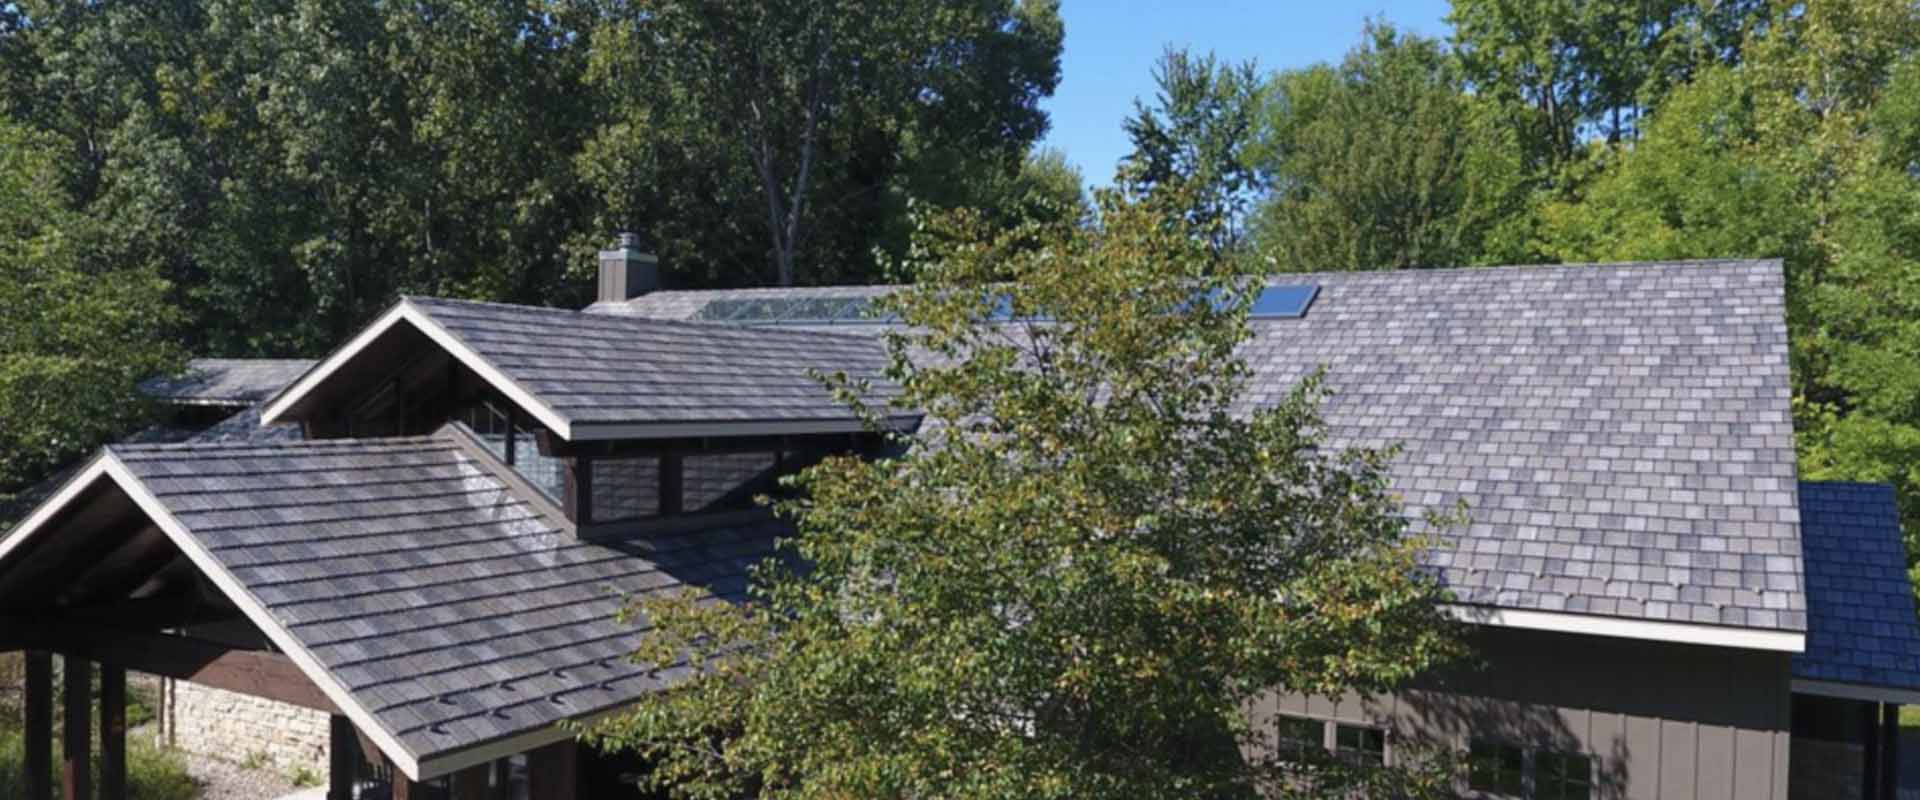 5 Tips for Picking a Roof Color | Wize Home Direct